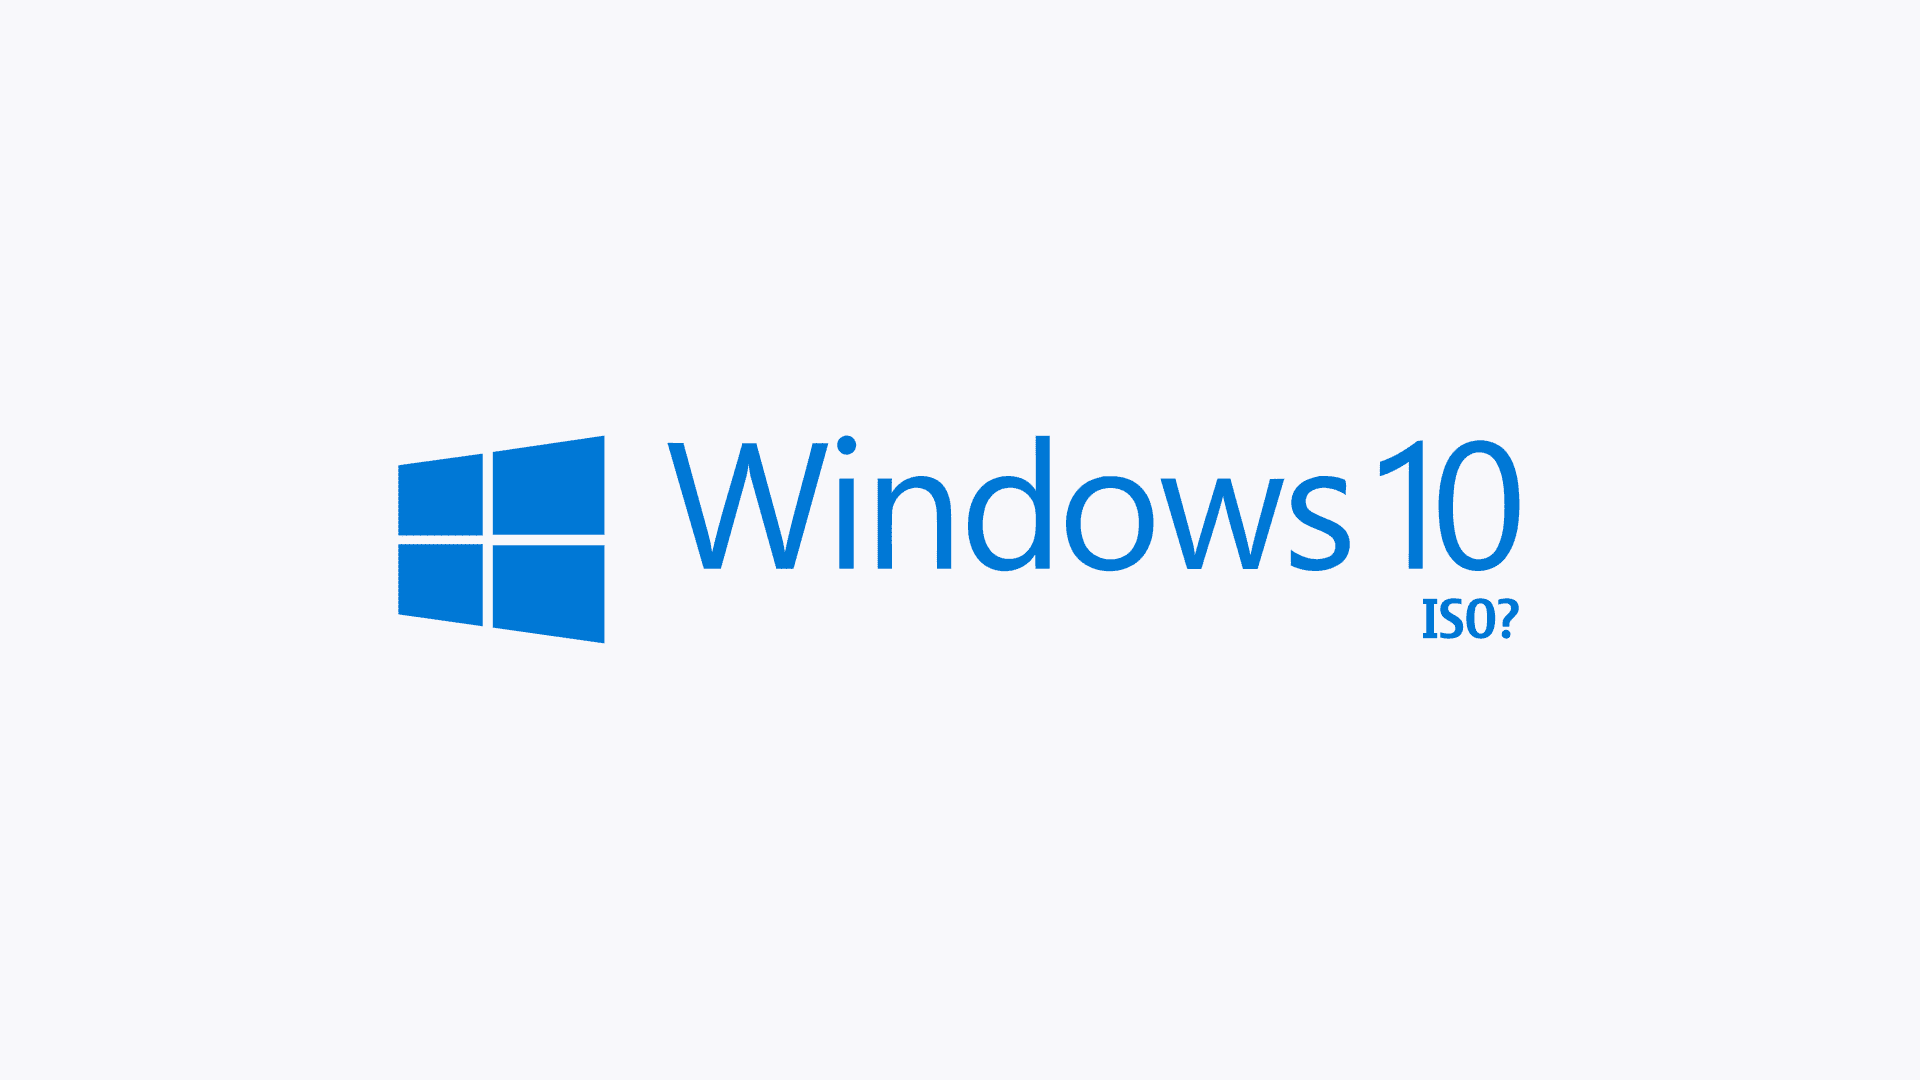 How to download Windows 10 image (ISO)